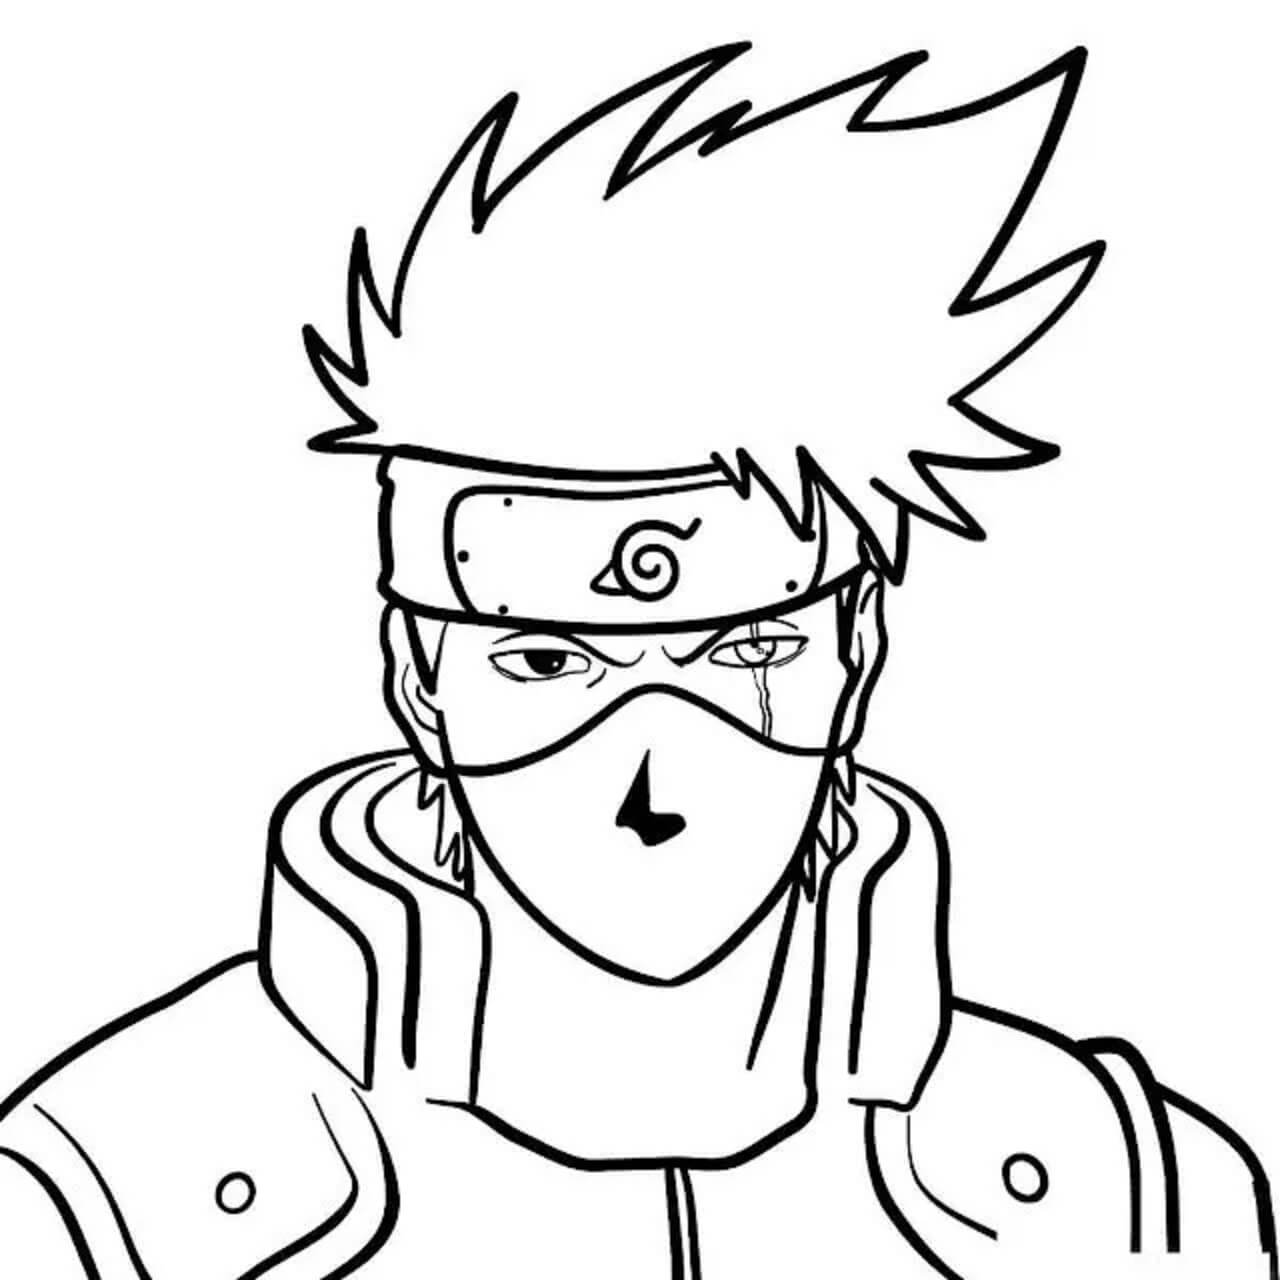 Art of Josh C Lyman - Now to cleanup and color.. forgot i drew on larger  paper ...stab in the dark whos on the other side? #kakashi #anime #manga  #inking #linework #naruto #